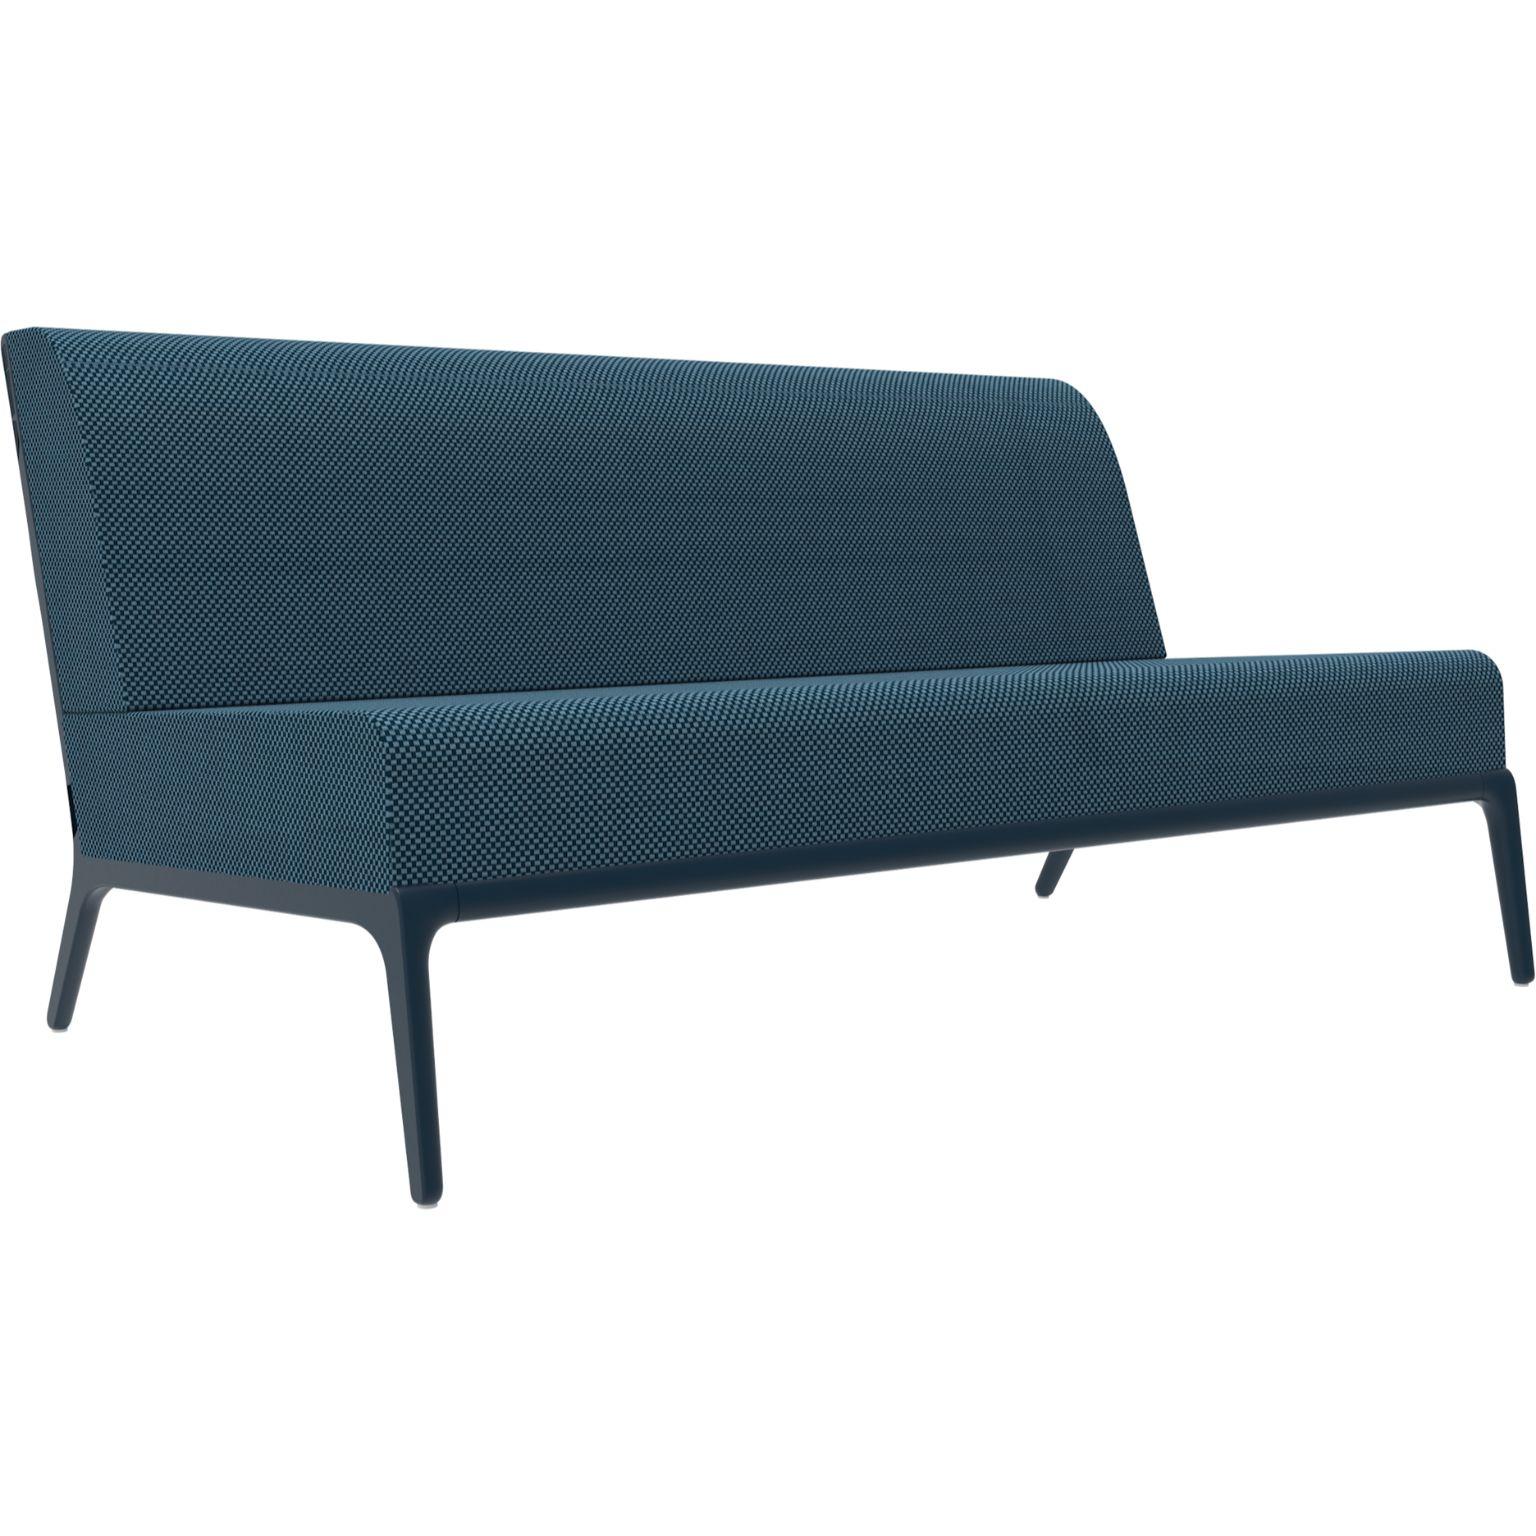 Xaloc Central 160 Navy Modular sofa by MOWEE
Dimensions: D100 x W160 x H81 cm (Seat Height 42cm)
Material: Aluminum, Textile
Weight: 35.5 kg
Also Available in different colors and finishes. 

 Xaloc synthesizes the lines of interior furniture